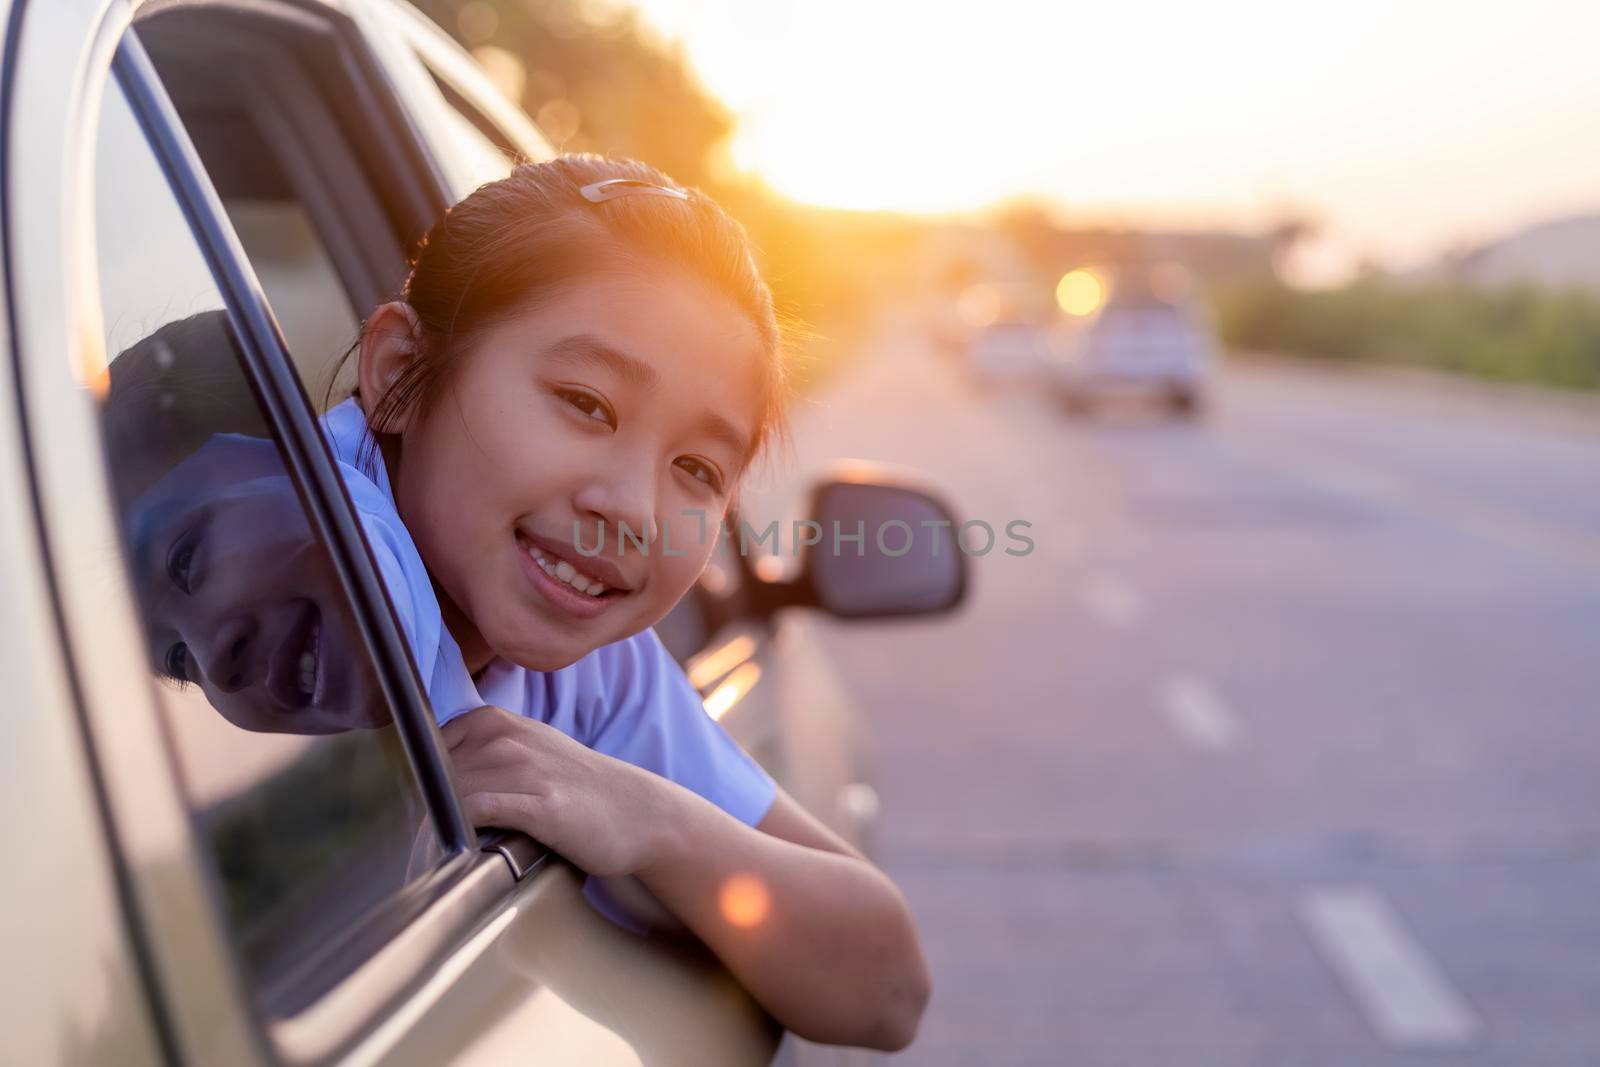 Asian little girl looking something out the car. In the morning, the girl was looking at something outside the car window on the way to school. children relax with street view from the car. Family at car concept.